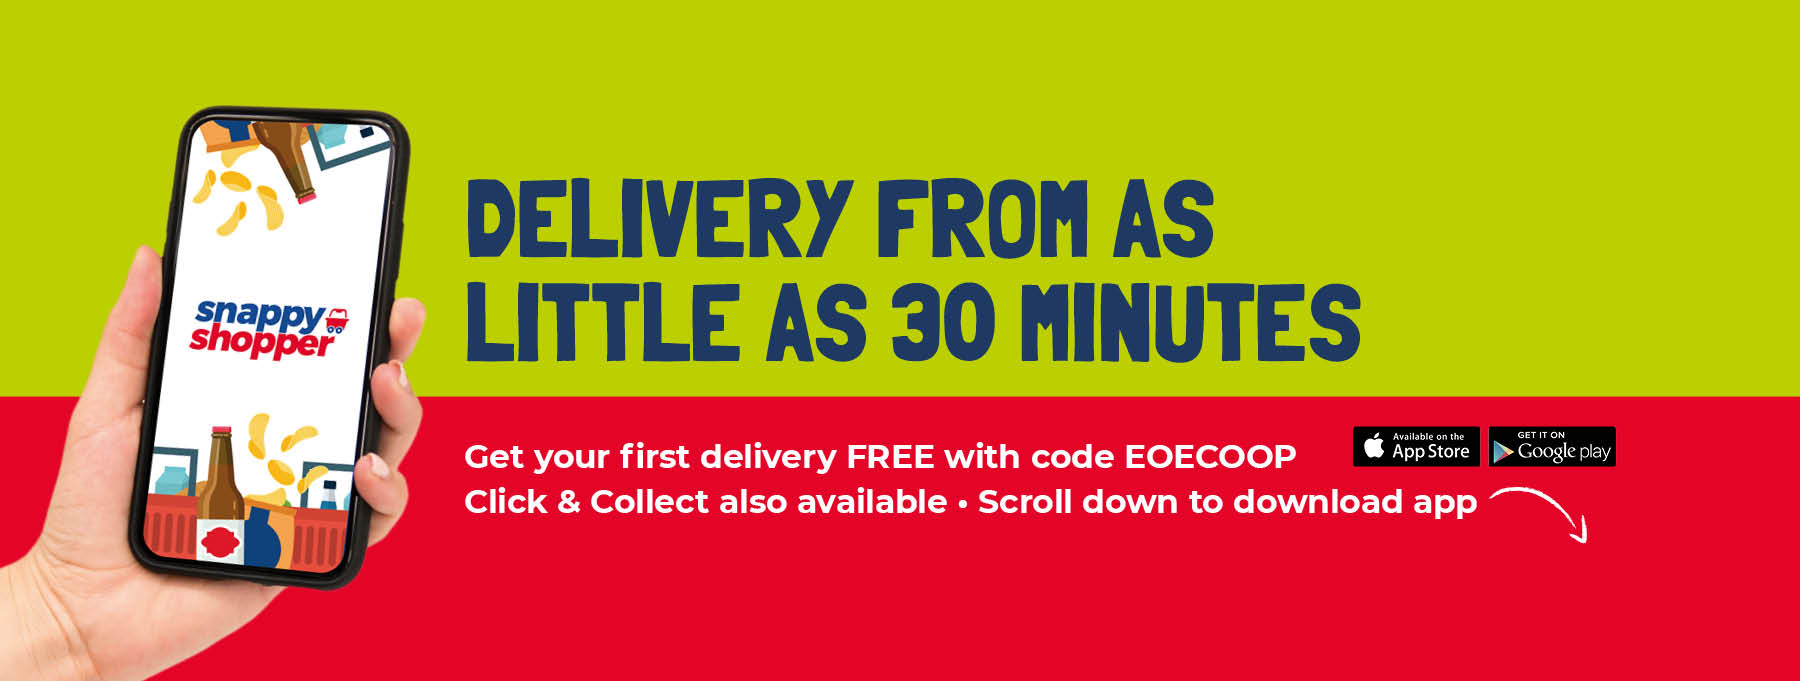 delivery code for snappy shopper